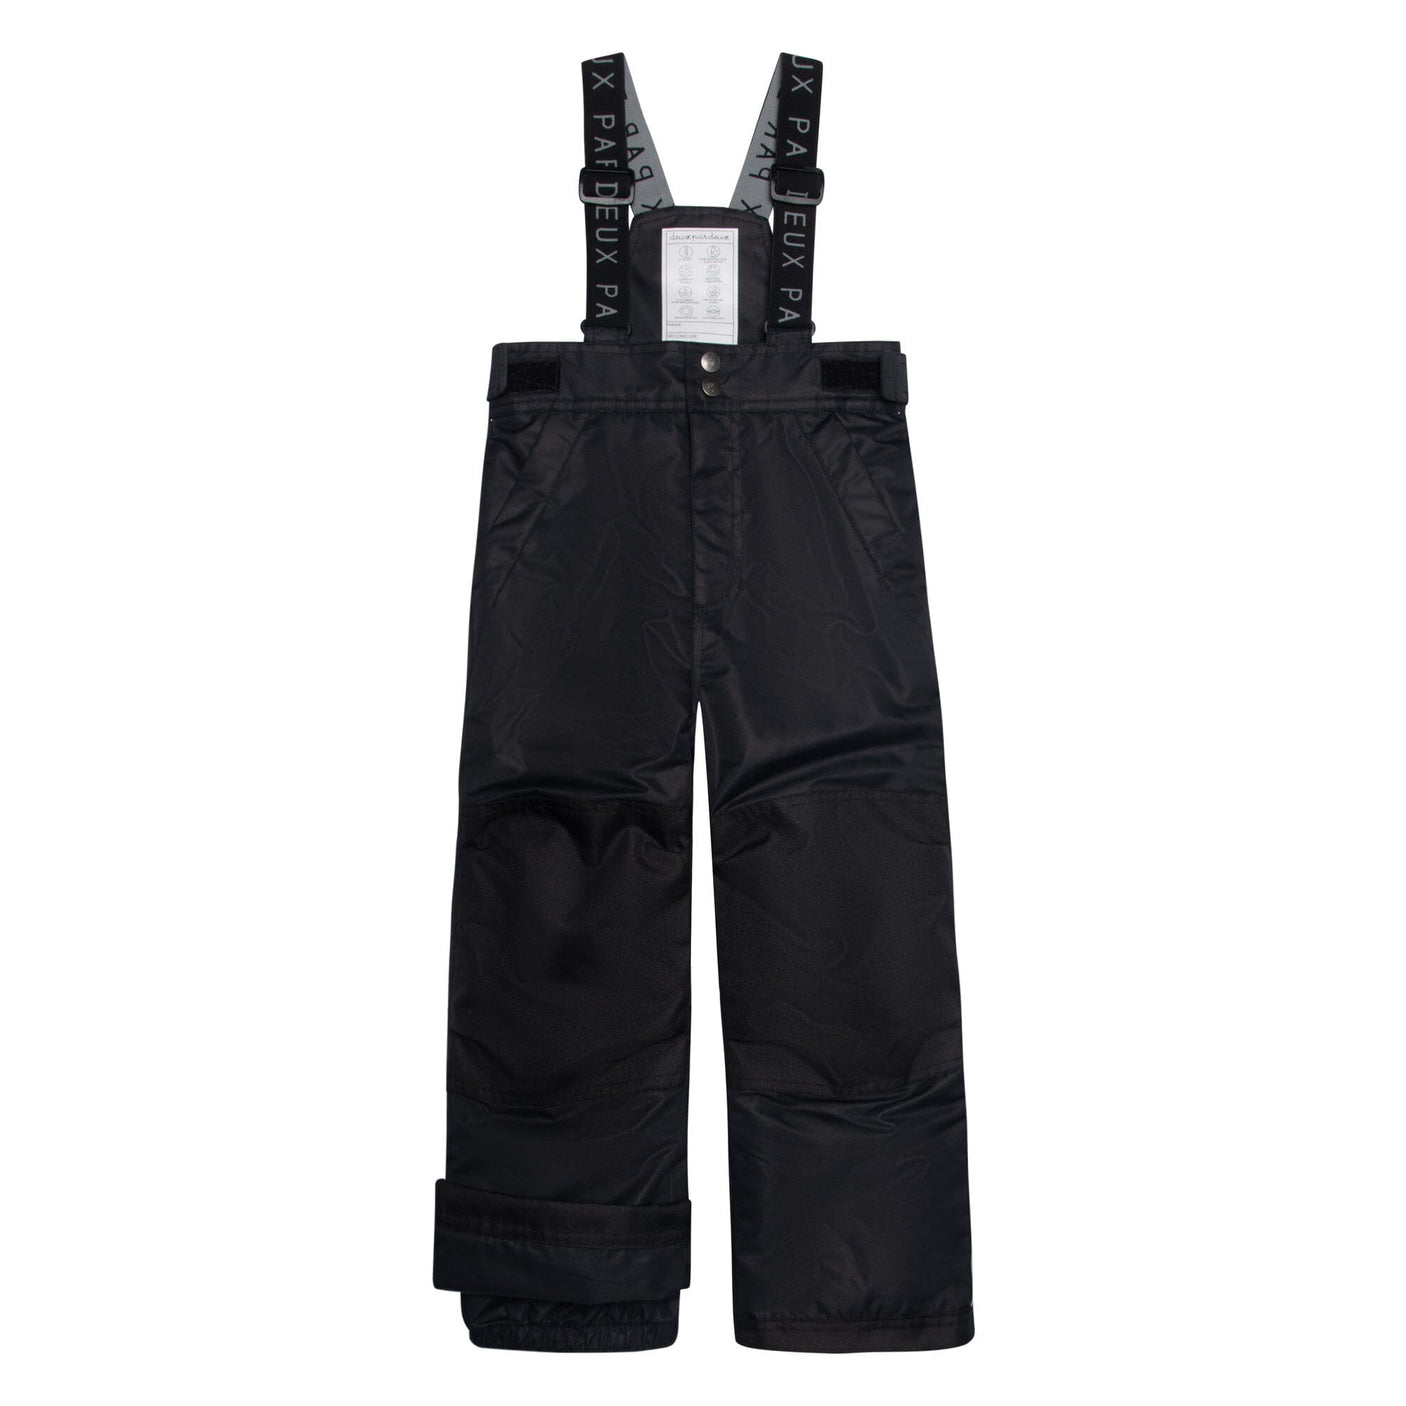 Two Piece Snowsuit Black With Forest Print-6